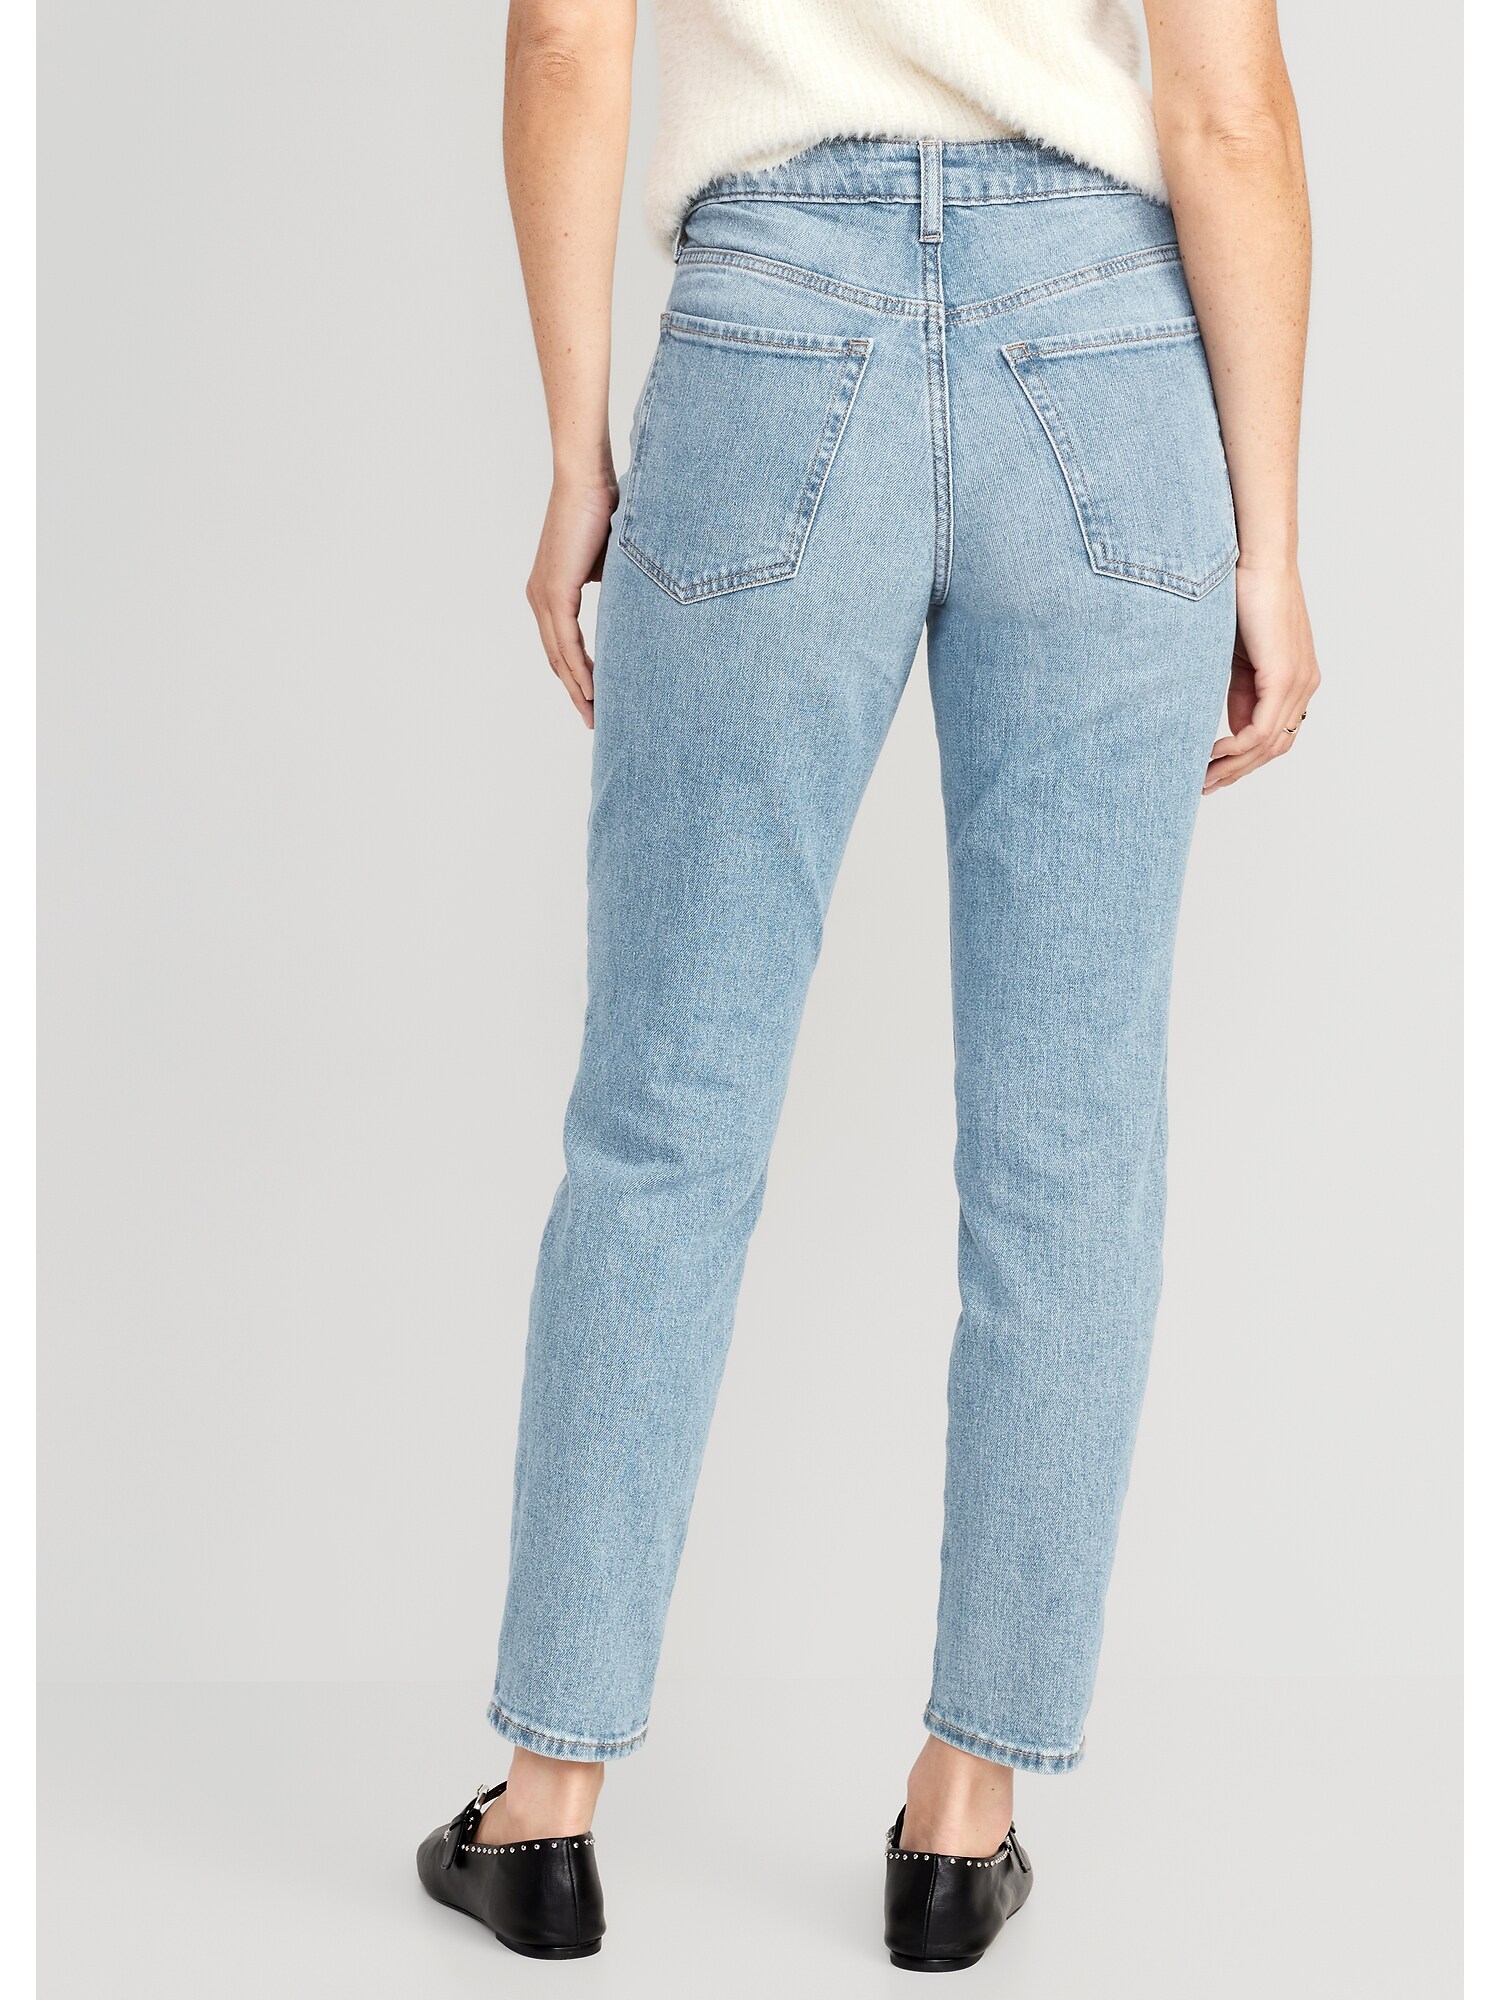 Old Navy Cotton Tall Jeans for Women for sale